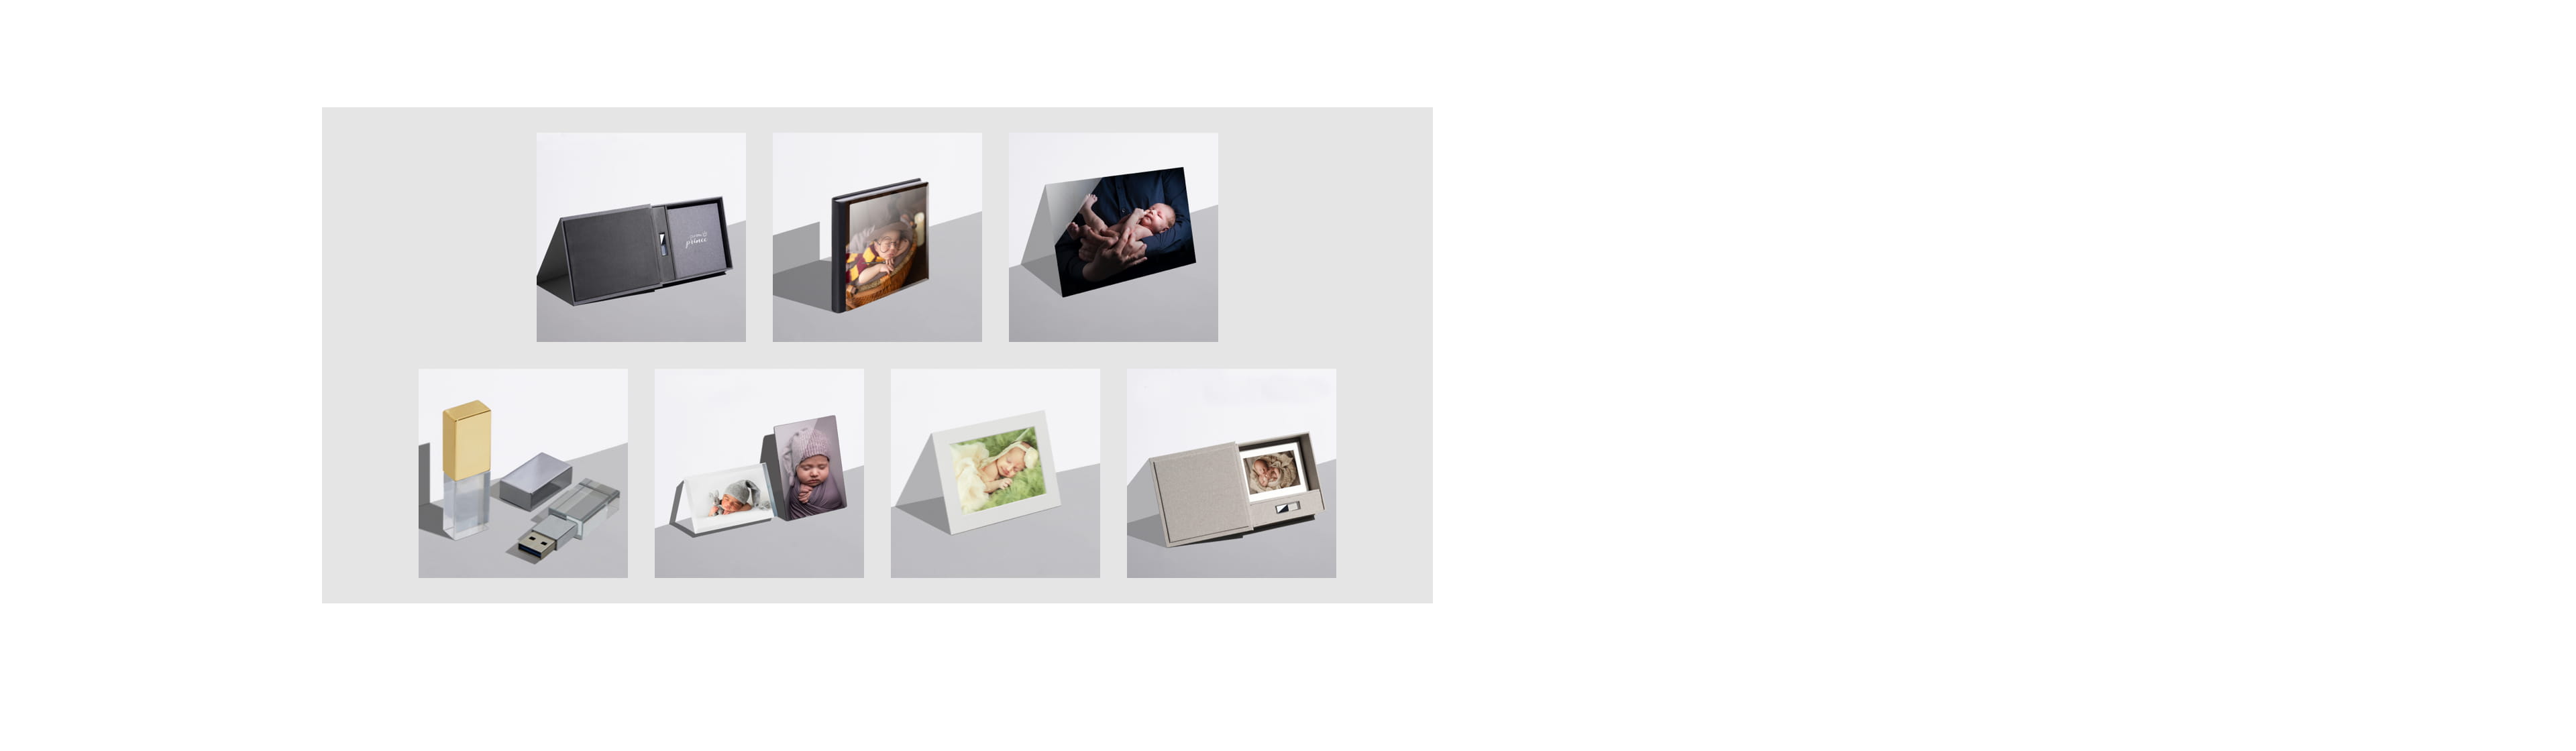 examples of the most popular print products for newborn photography